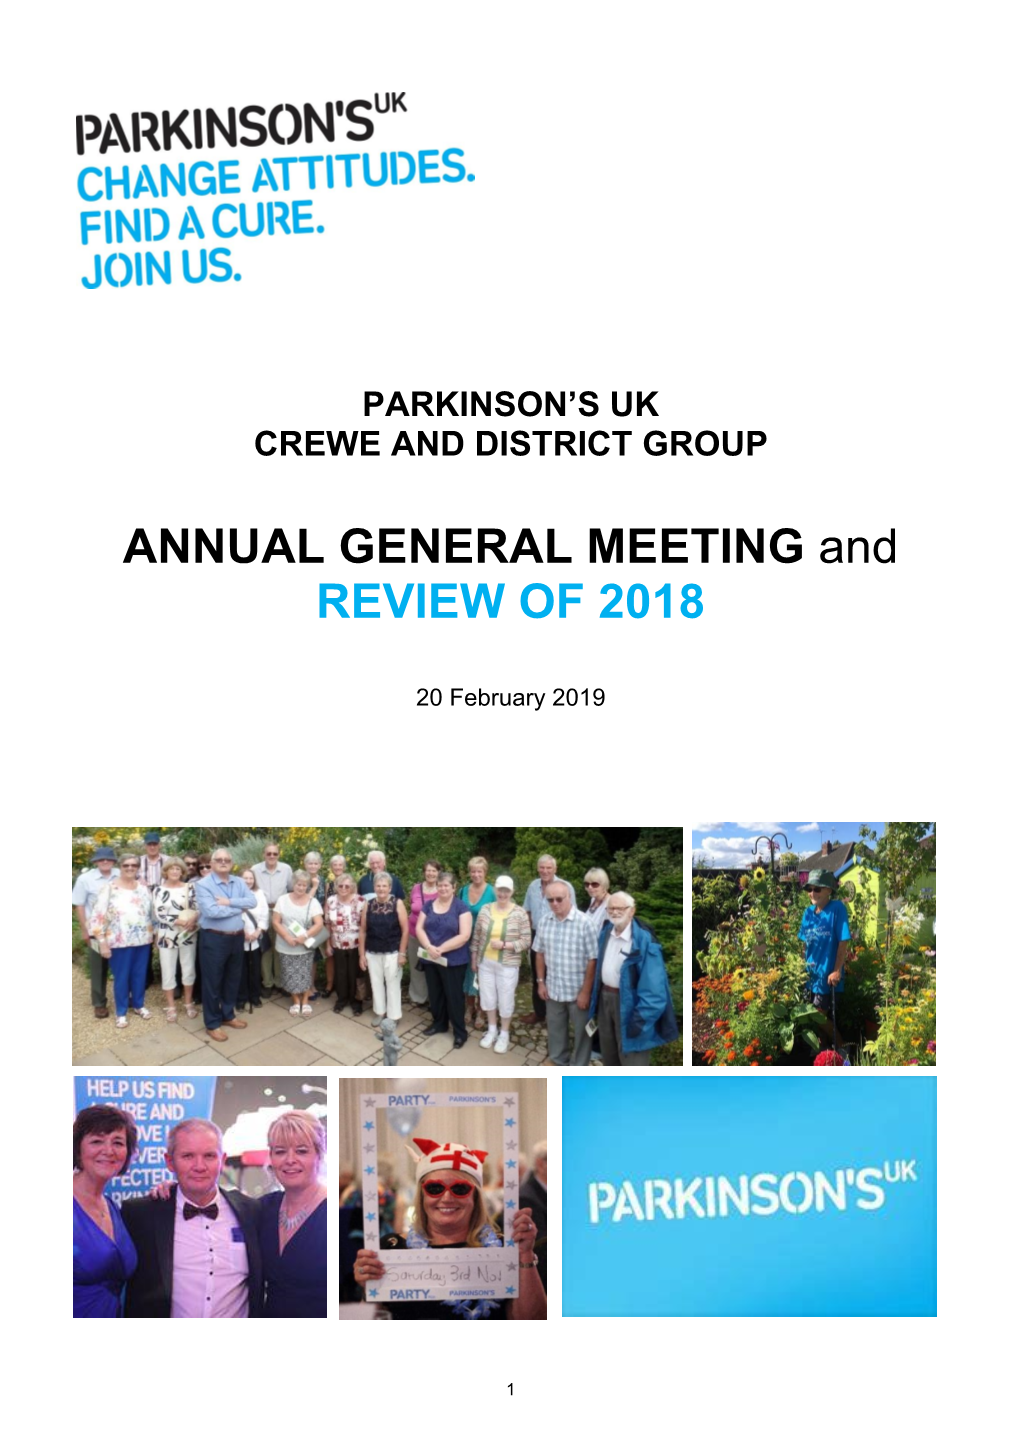 ANNUAL GENERAL MEETING and REVIEW of 2018